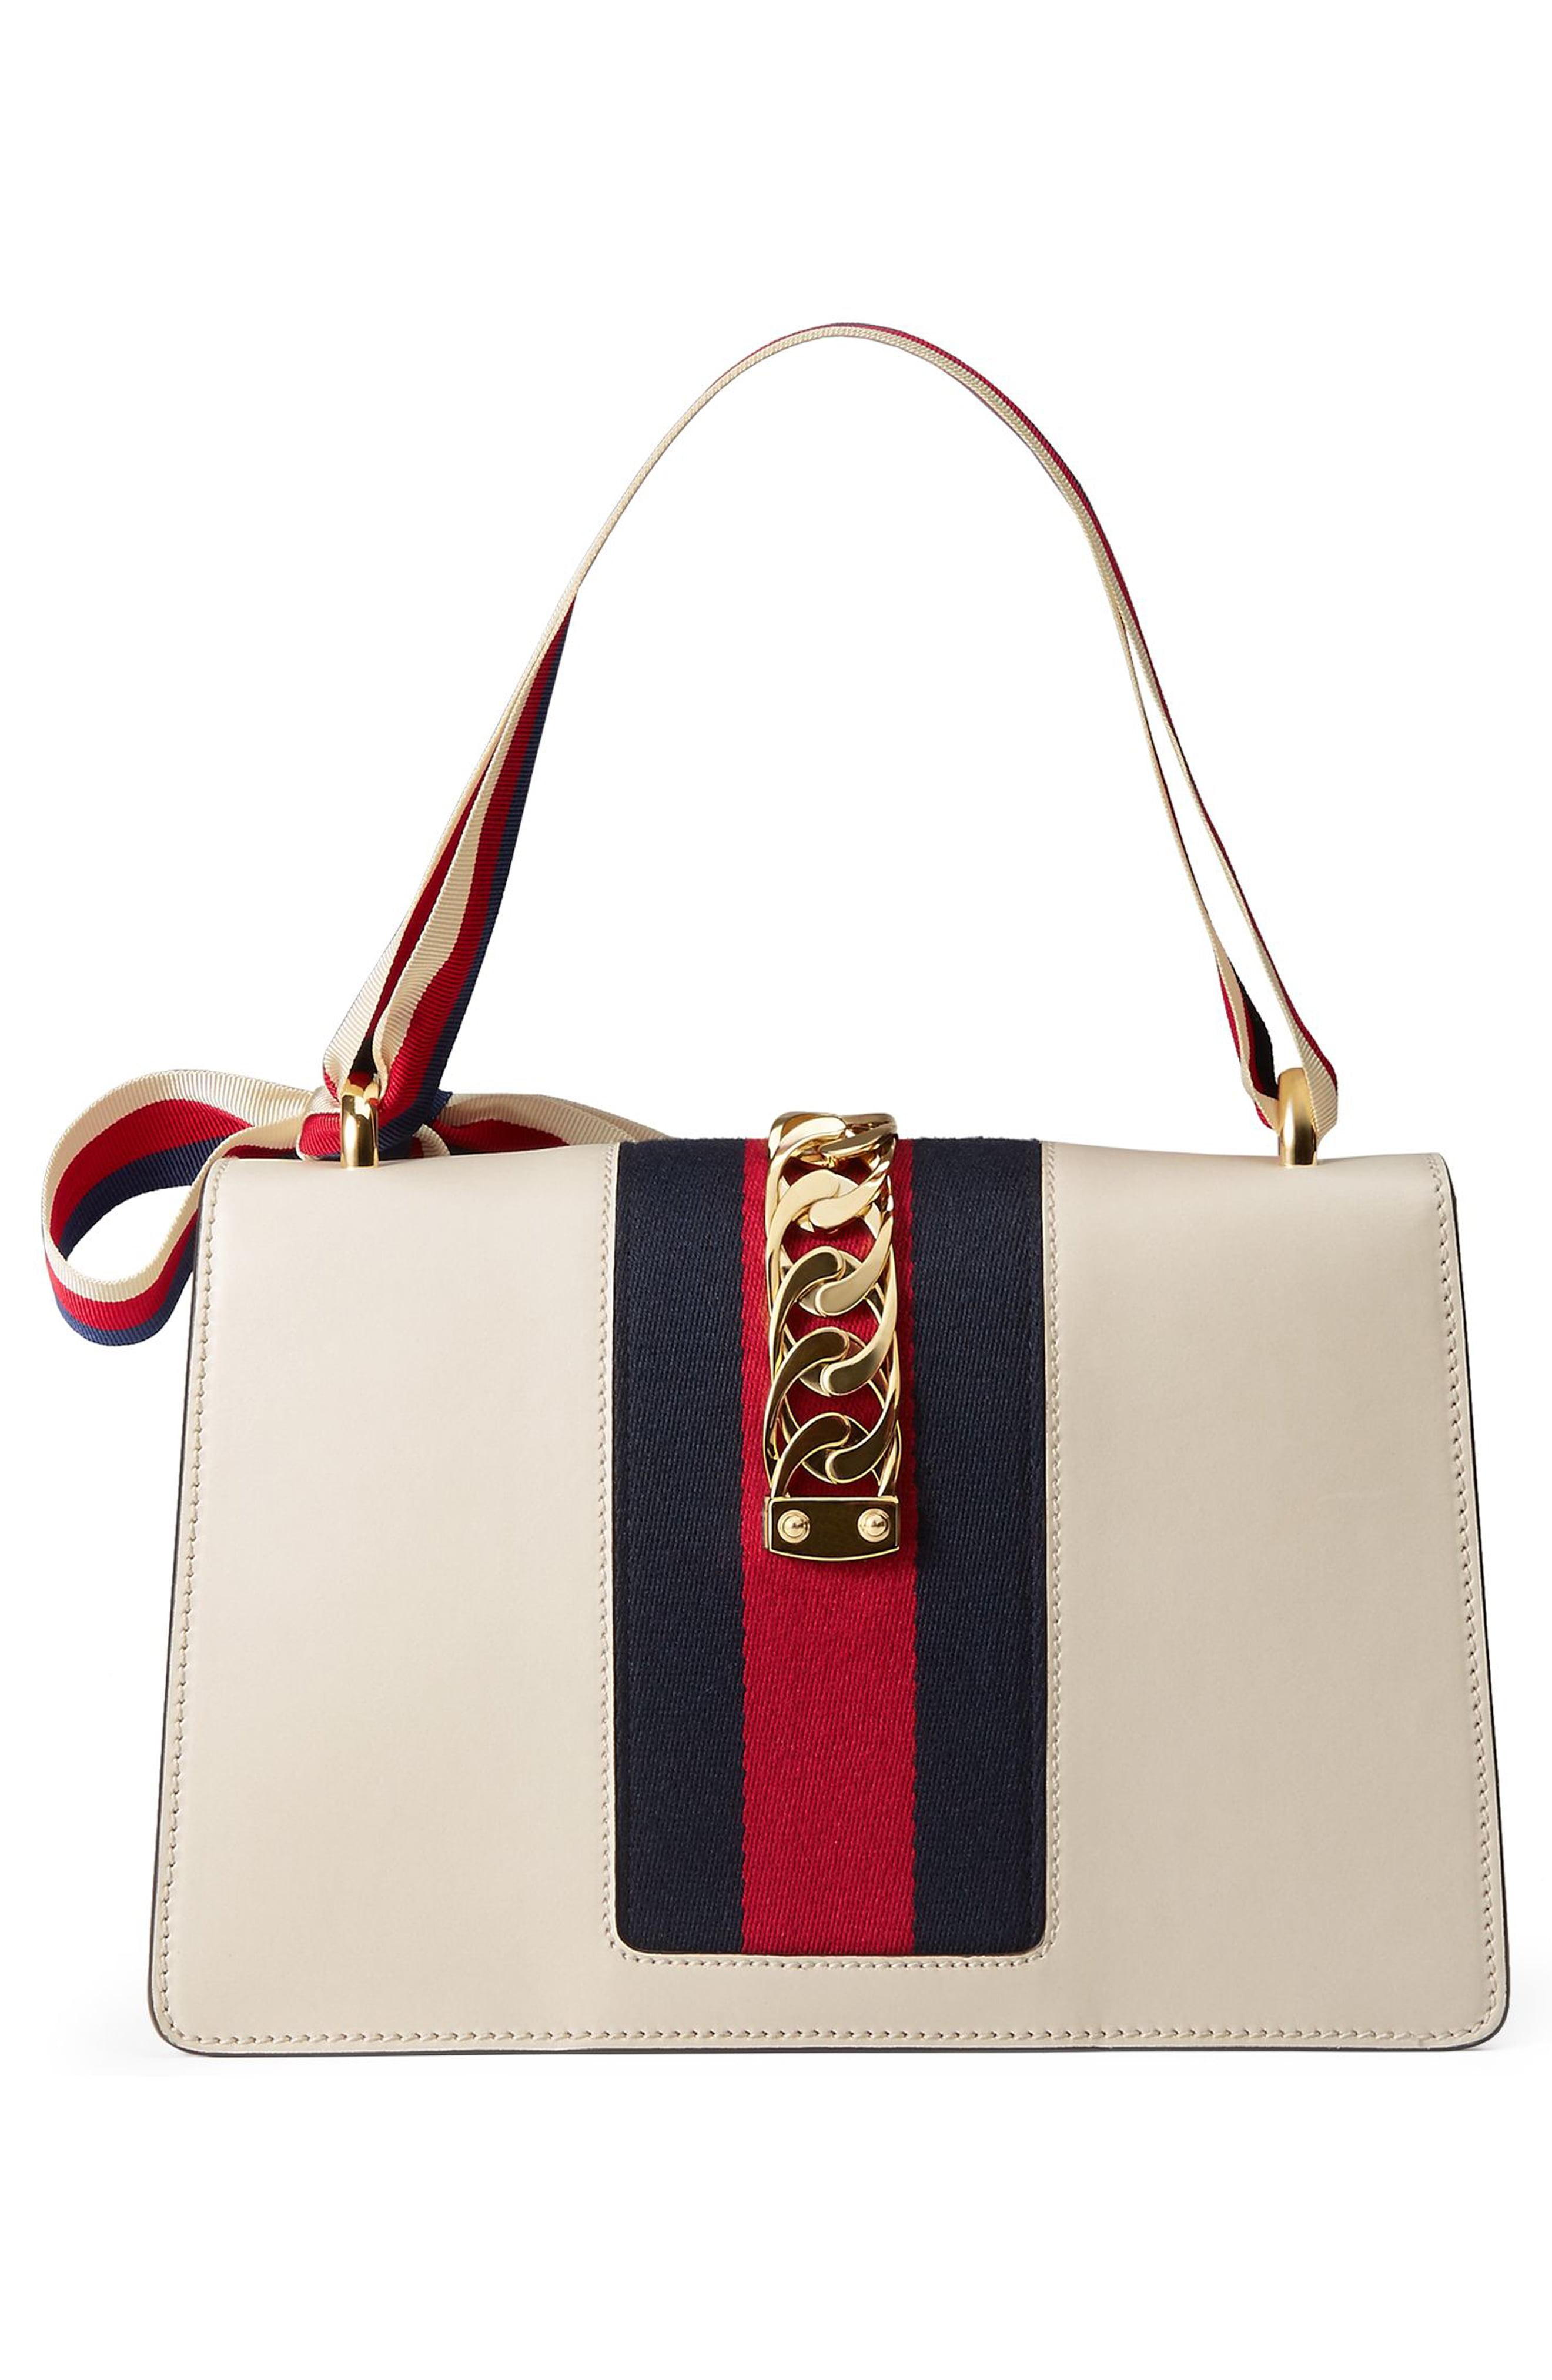 Gucci Small Leather Shoulder Bag in White - Lyst